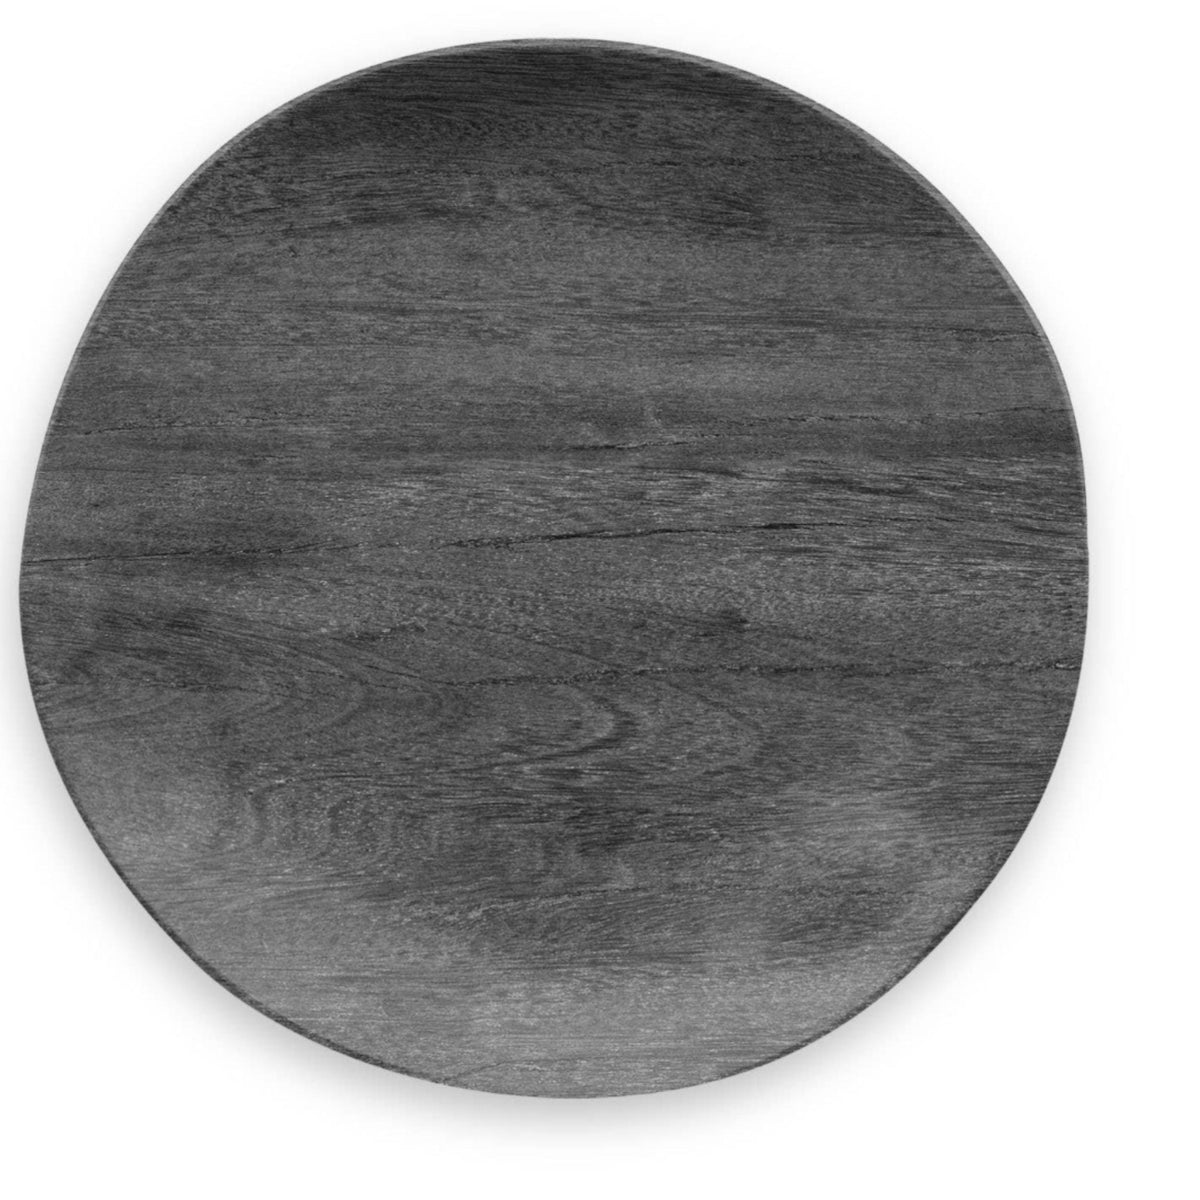 Blackened Large Round Dinnerware Plate-Home Decor-The Life ™ Boutique | Westfield, NJ-The Life ™ Boutique | Westfield, NJ